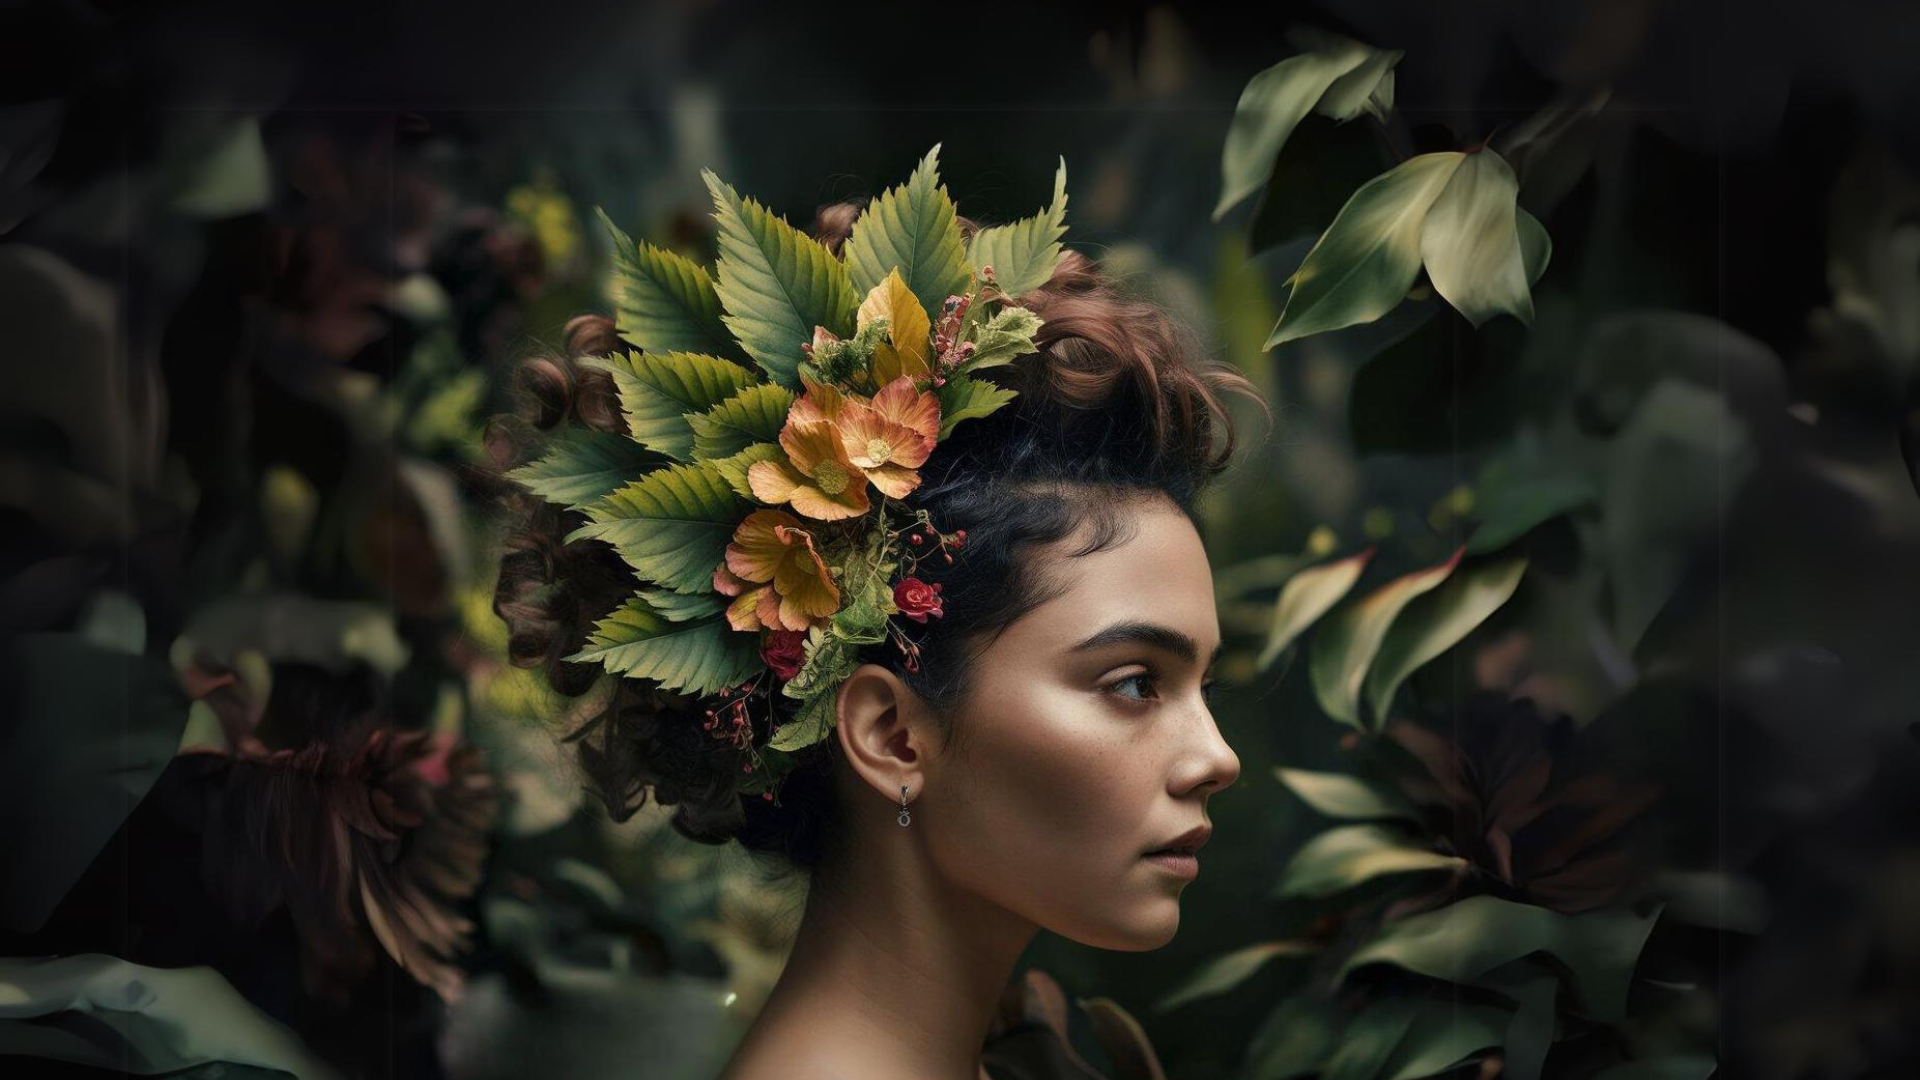 Latina woman with natural hair adorned with flowers and leaves. Lush background emphasizes Earth Day theme of eco-friendly hair care.